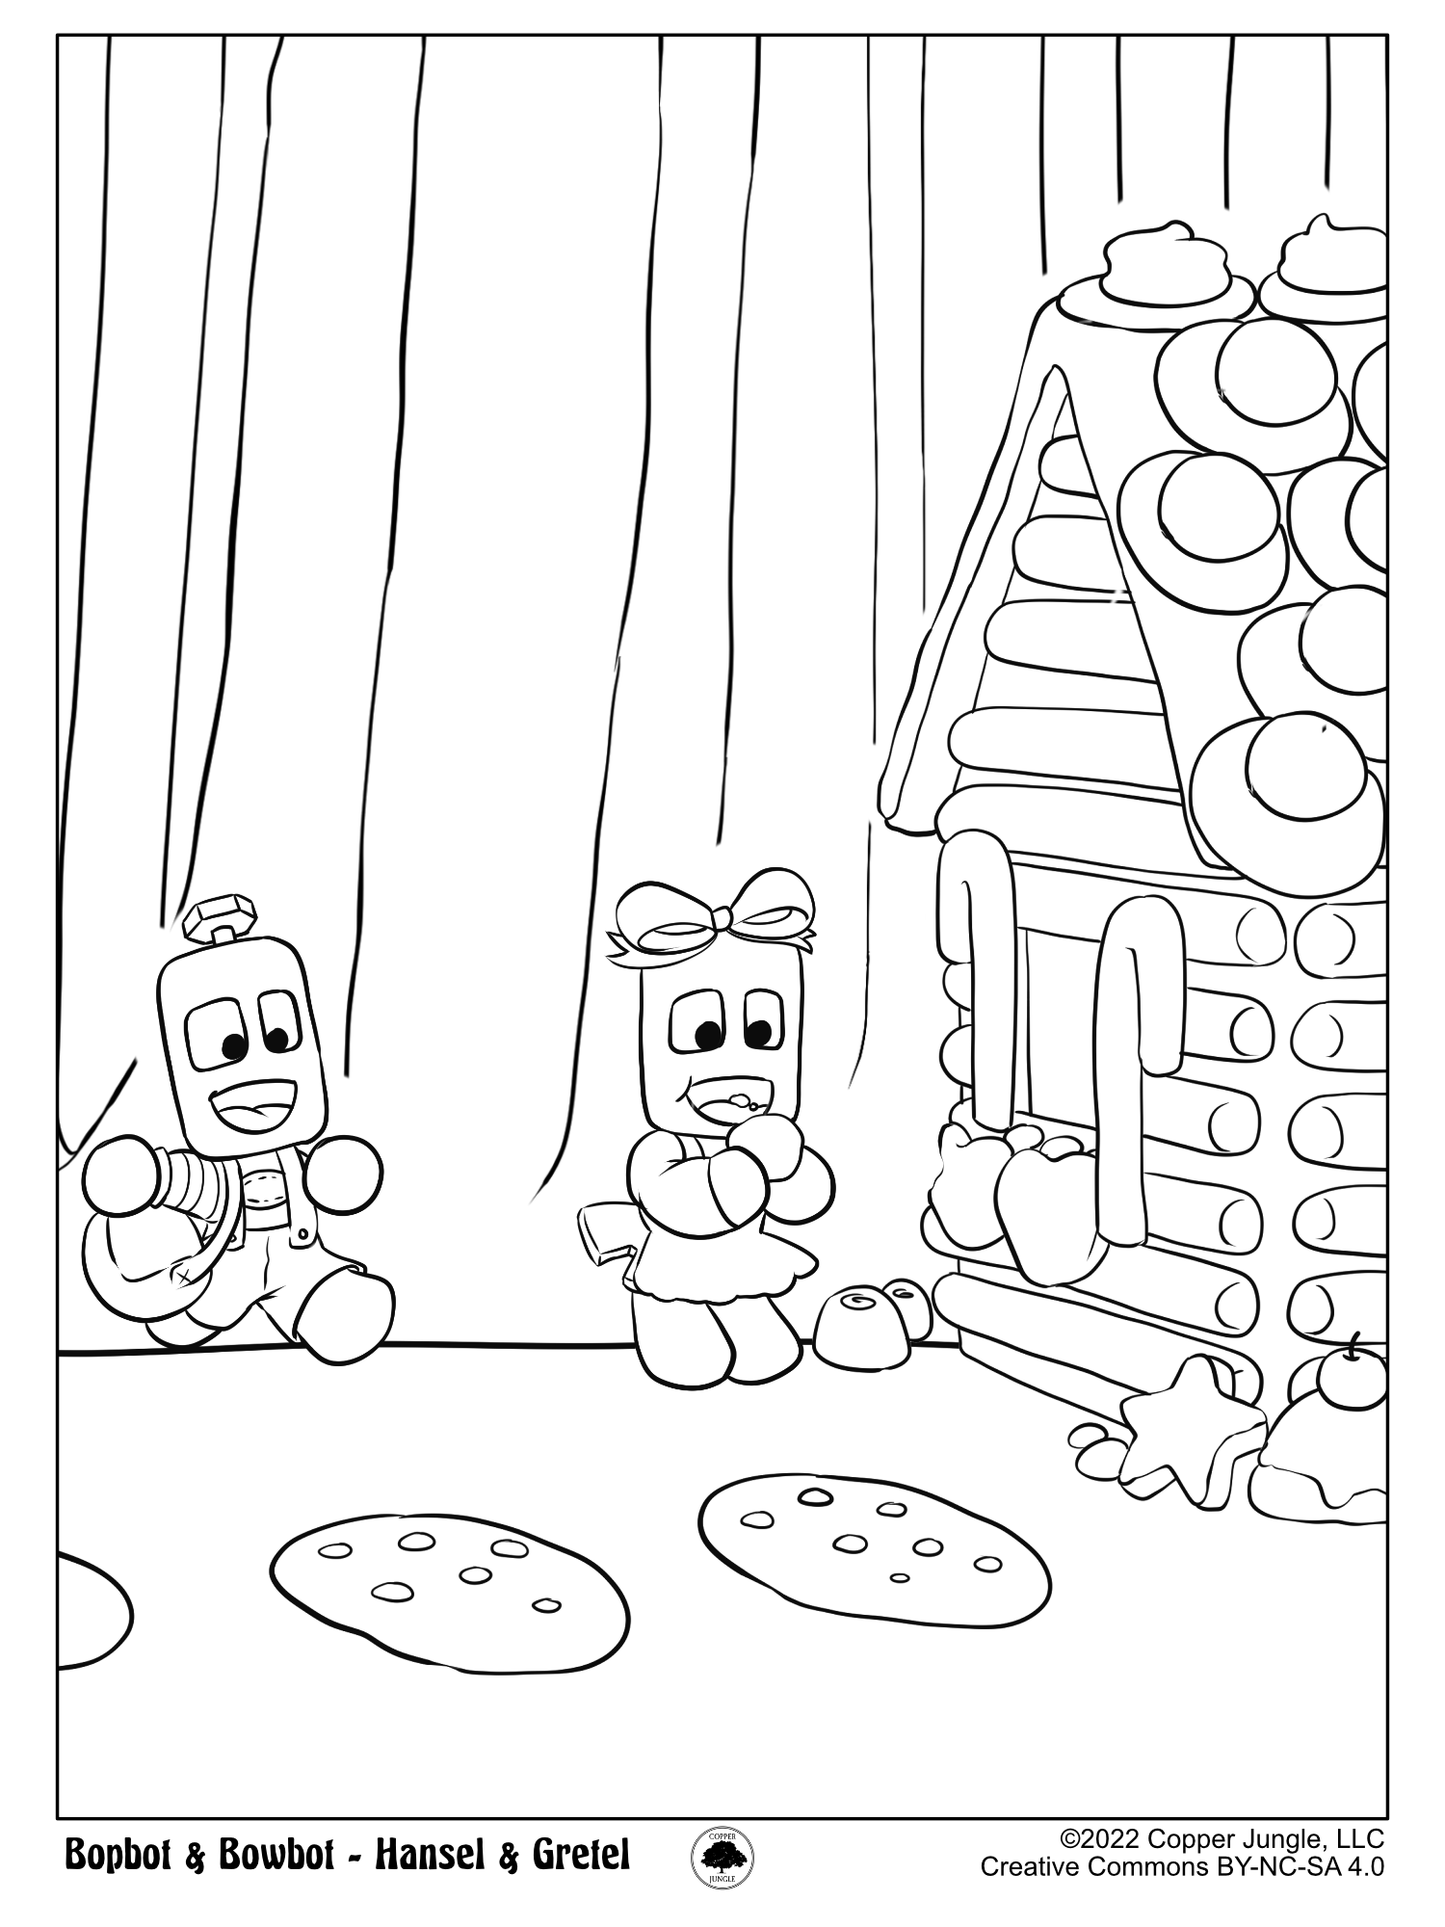 Gingerbread House Coloring Page - Bopbot & Bowbot Hansel and Gretel